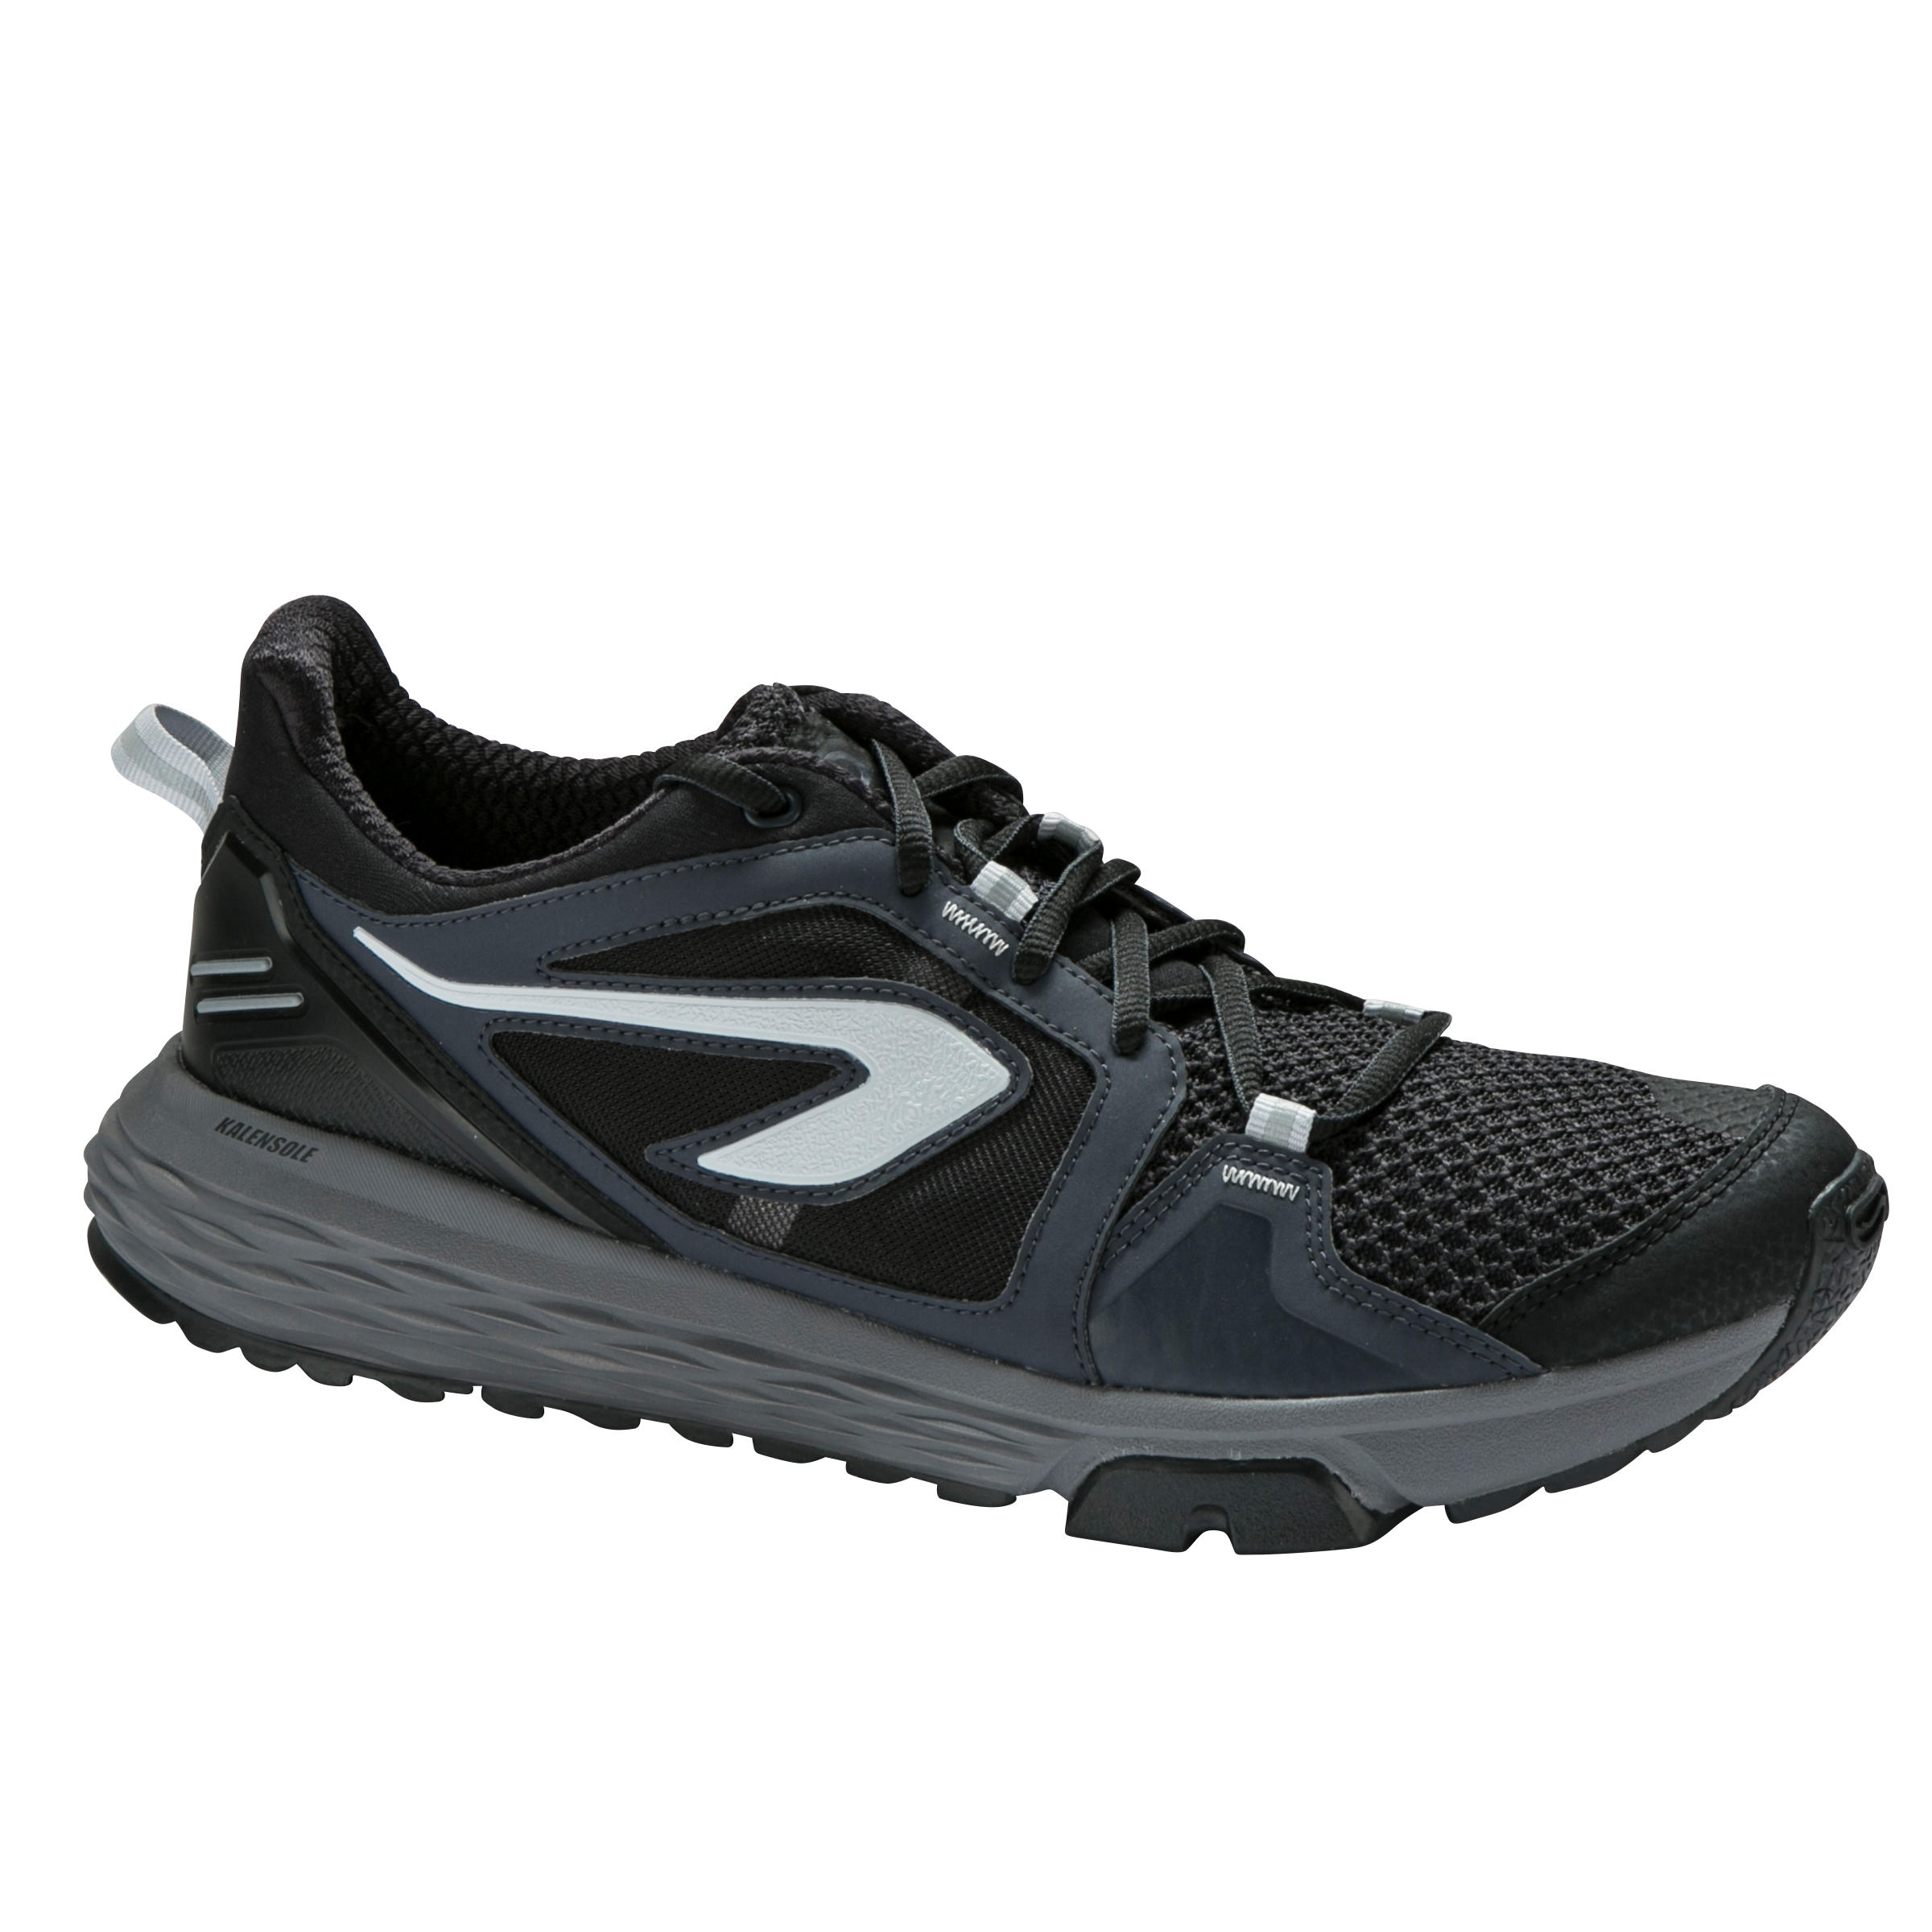 Casual Trainers, Gym Trainers | Decathlon